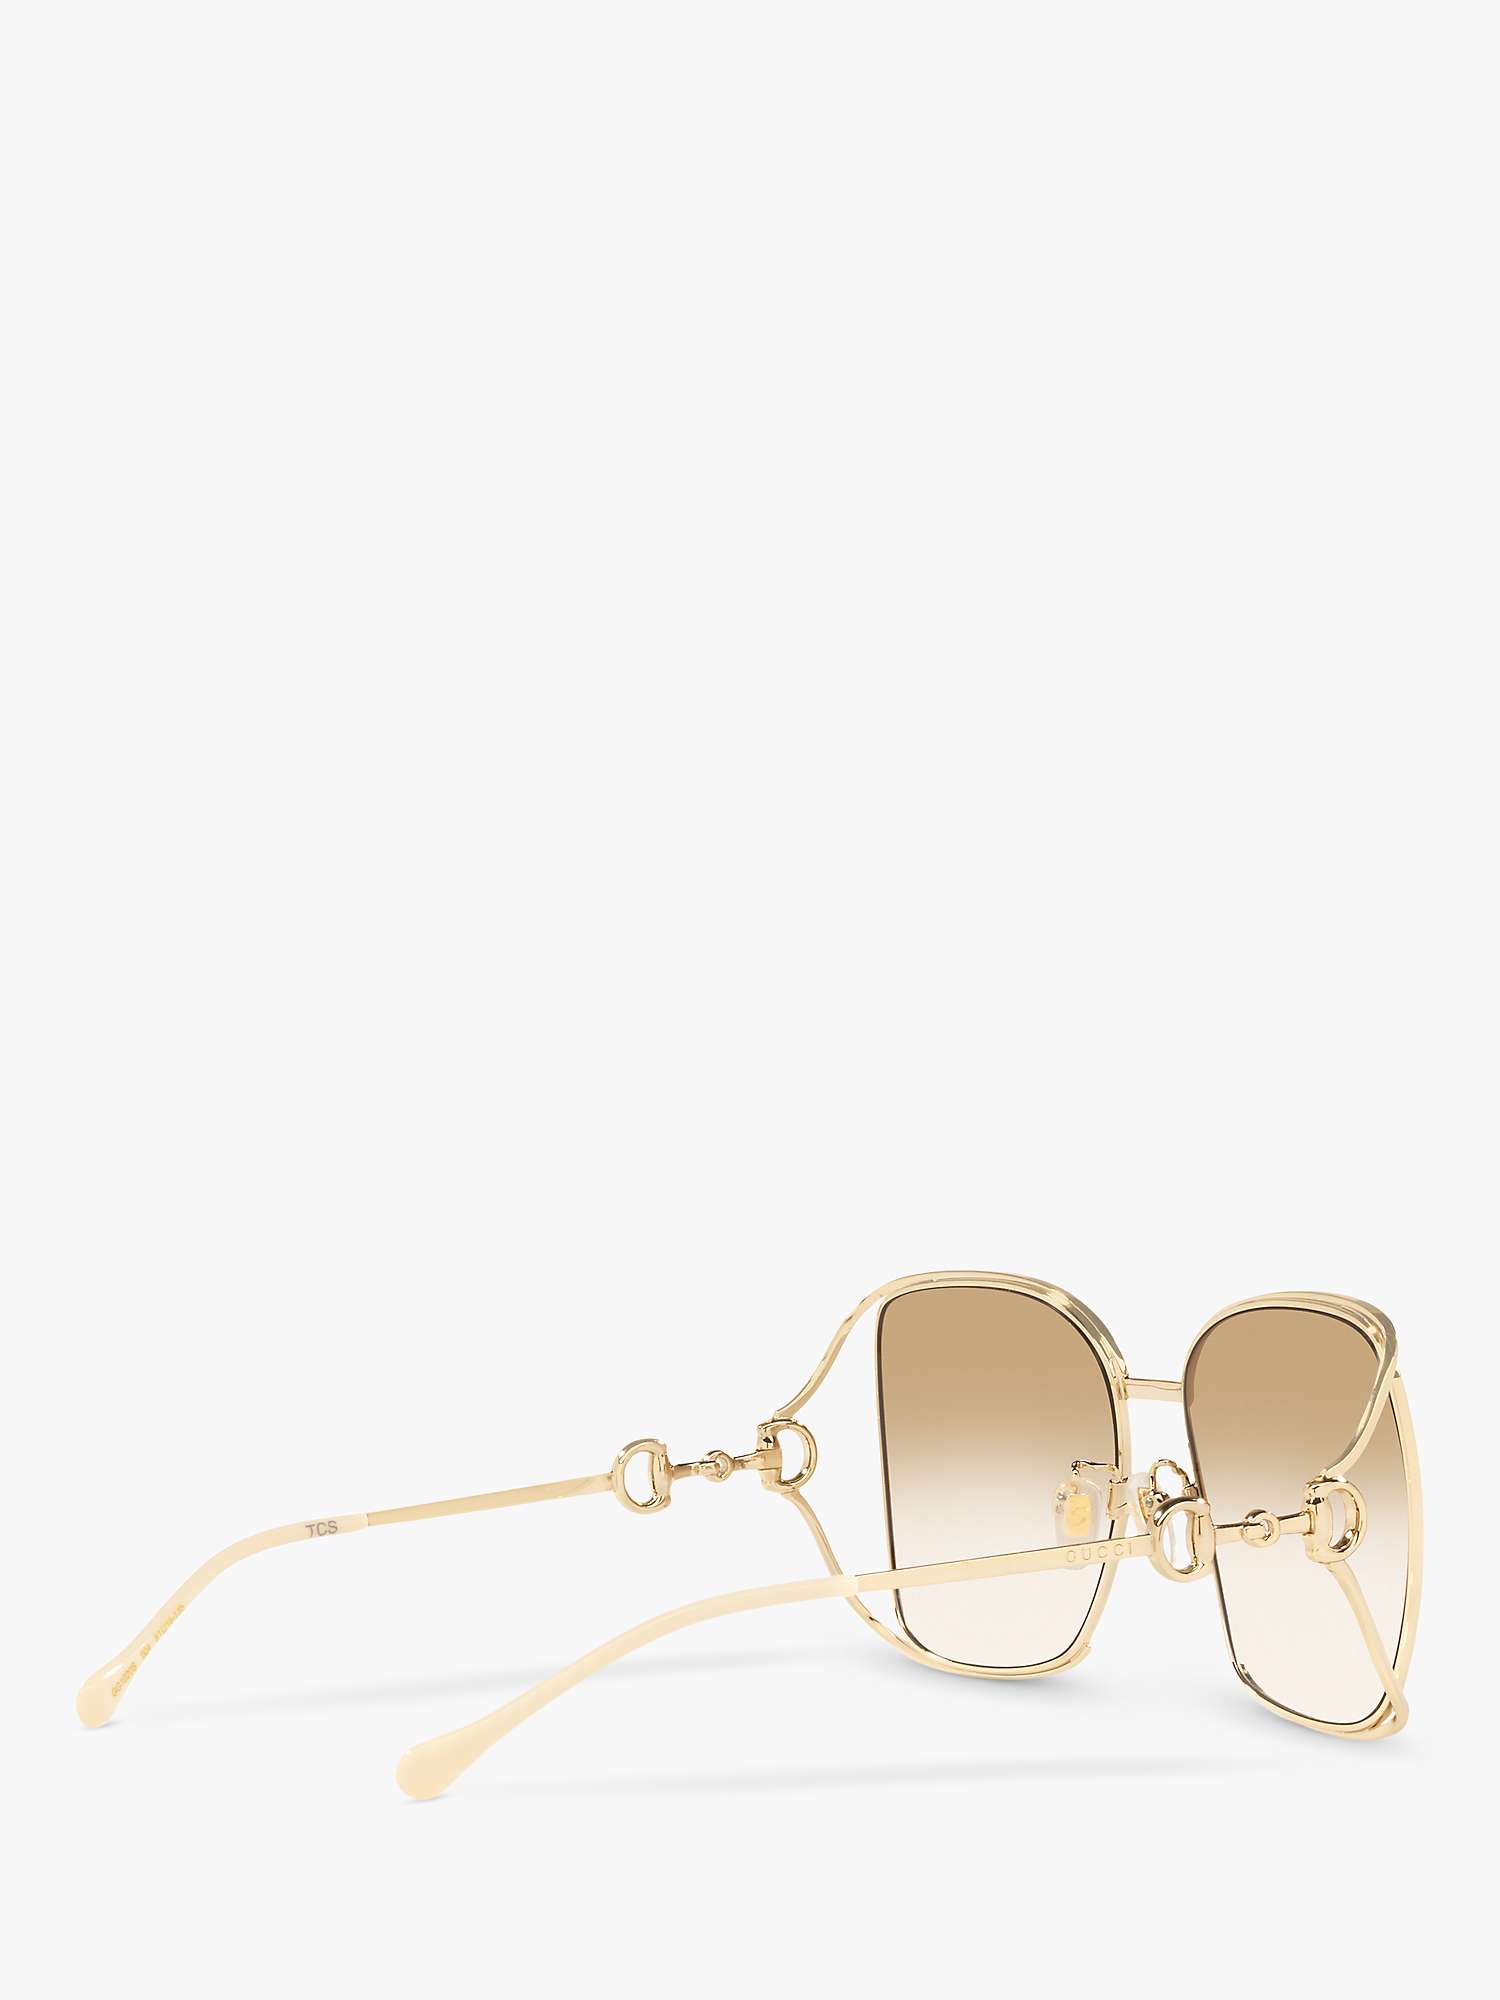 Buy Gucci GG1020S Women's Square Sunglasses, Gold/Brown Gradient Online at johnlewis.com